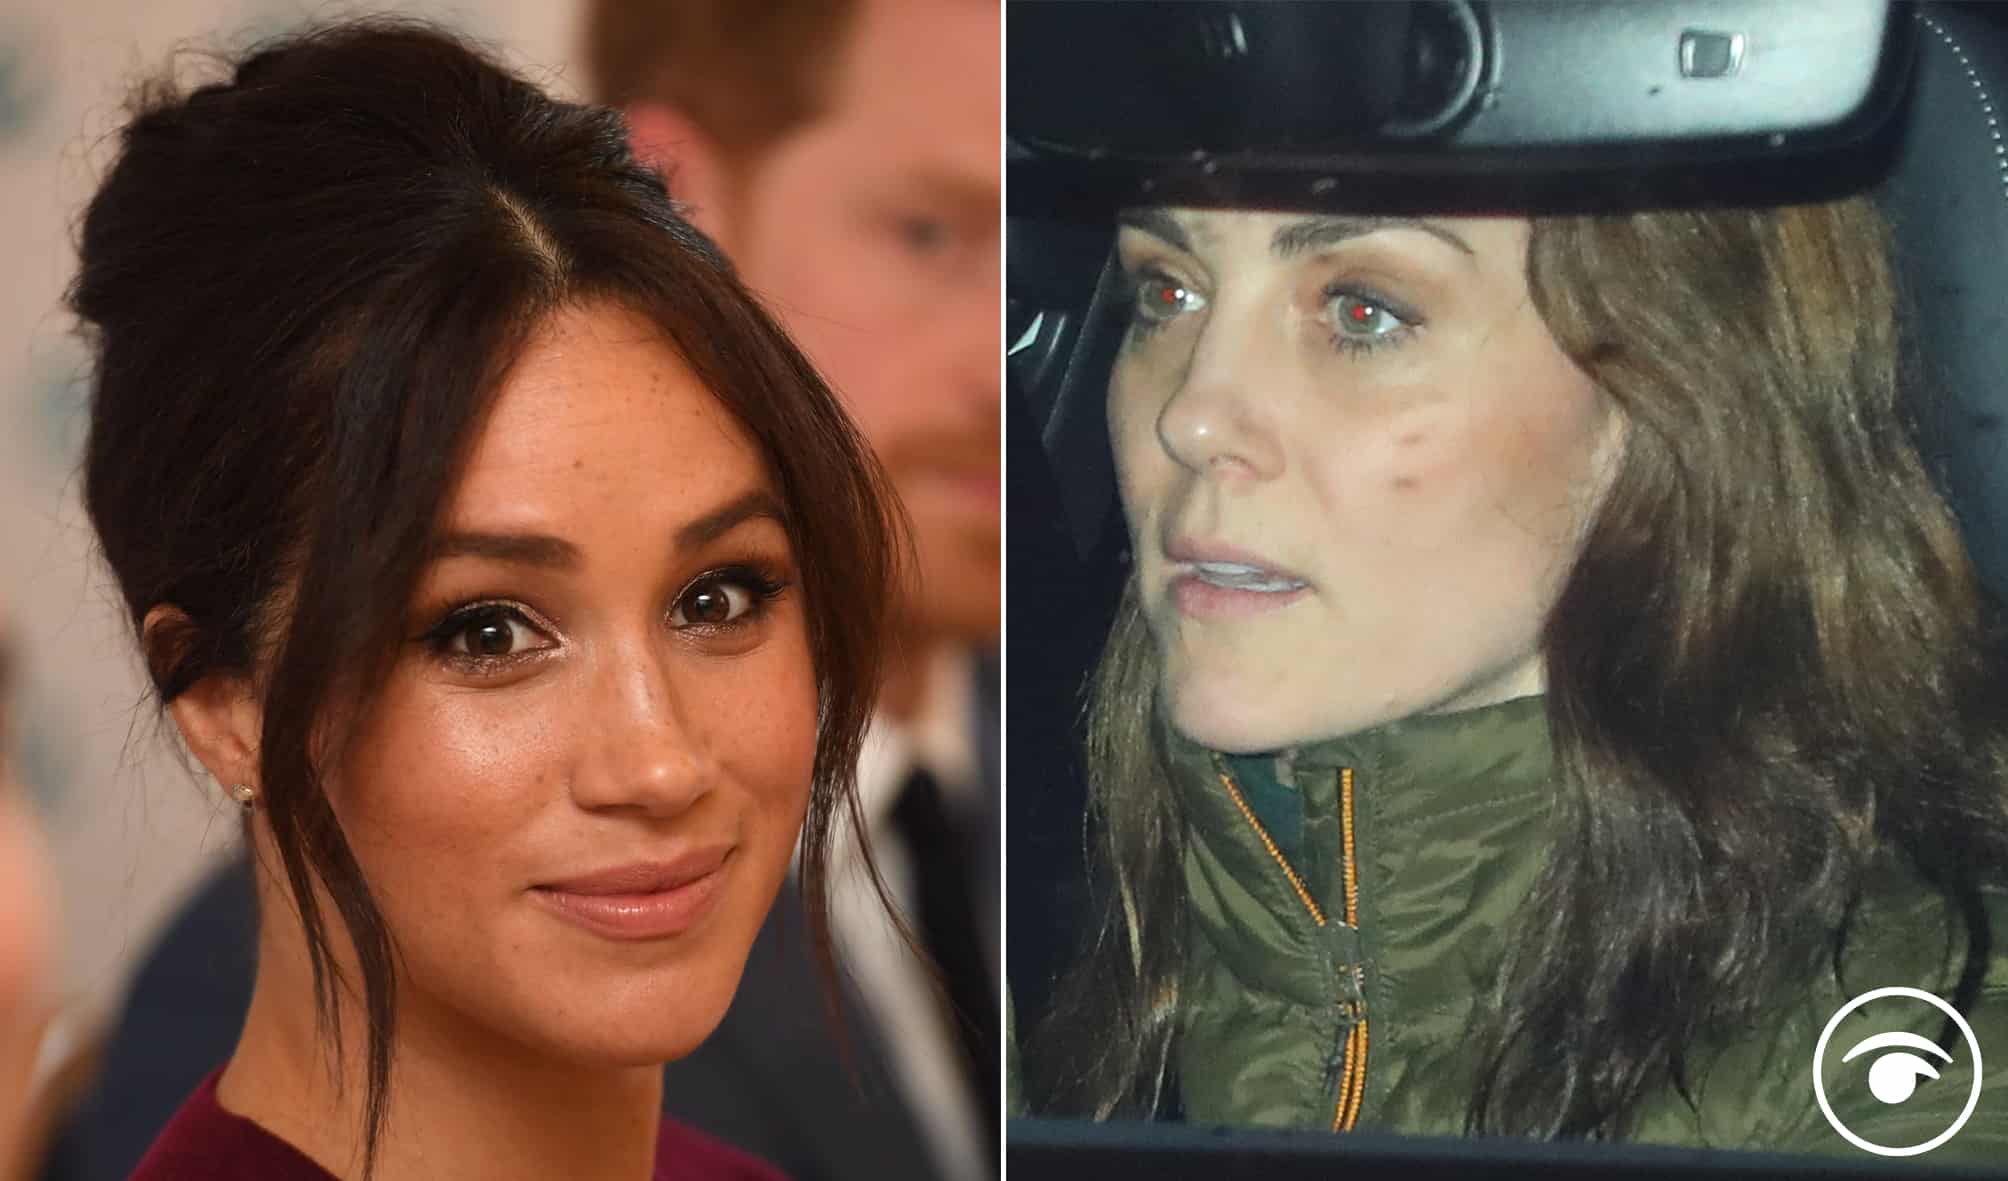 Contrasting headlines about Meghan Markle and Kate Middleton goes viral